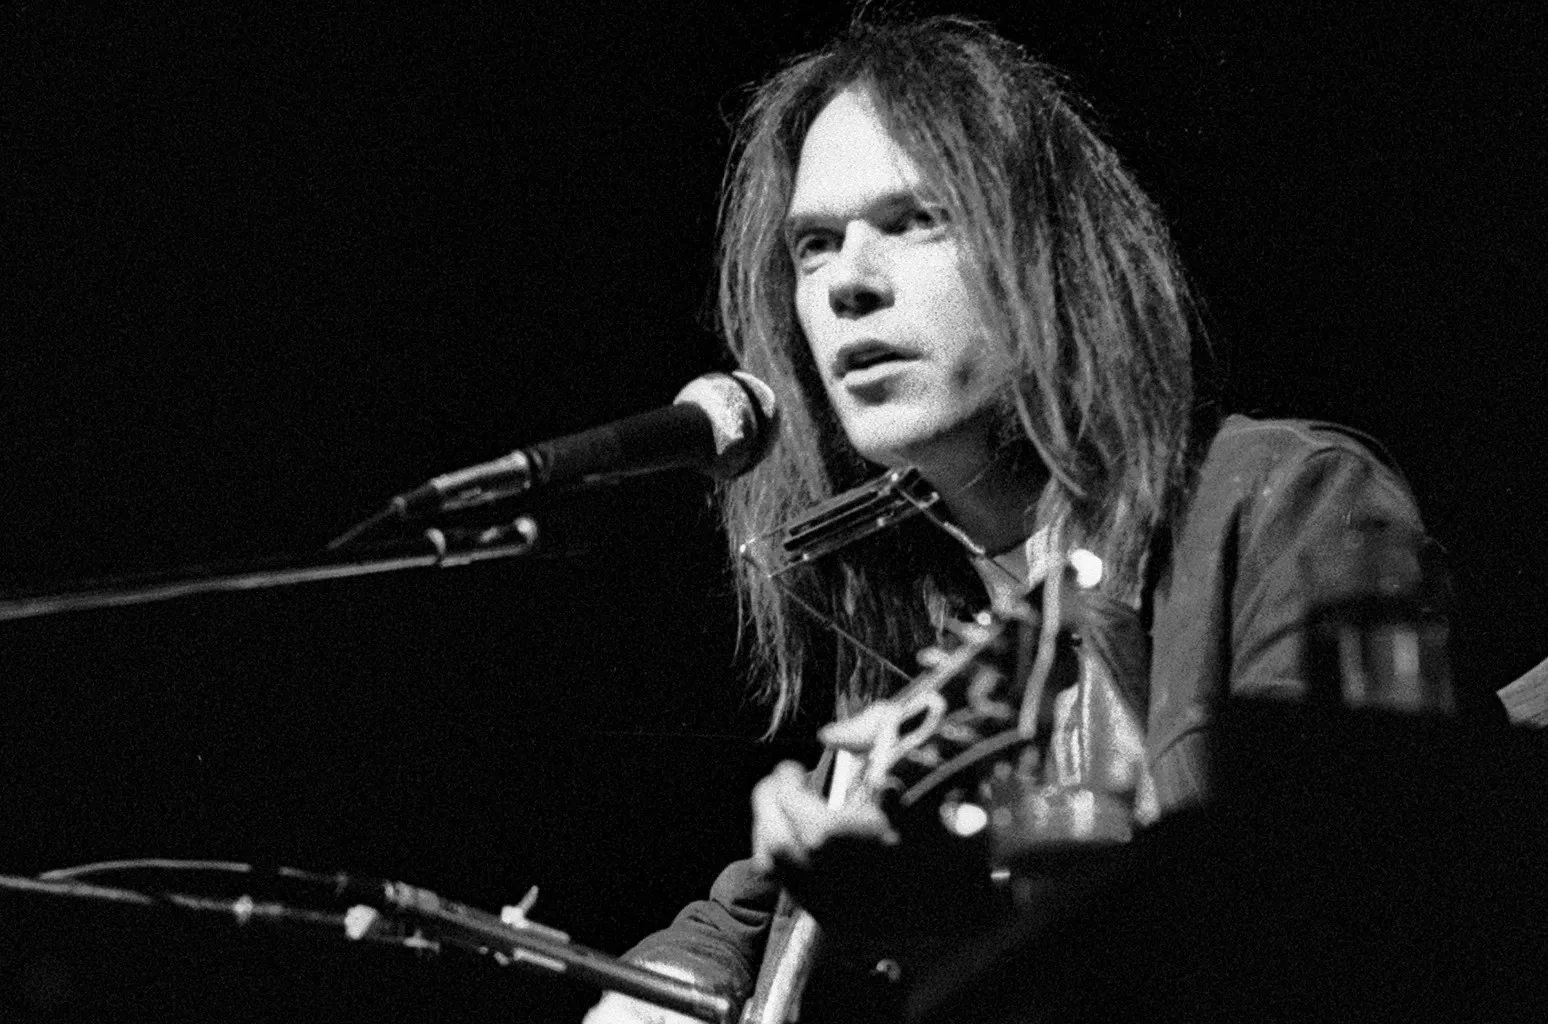 Neil Young photo